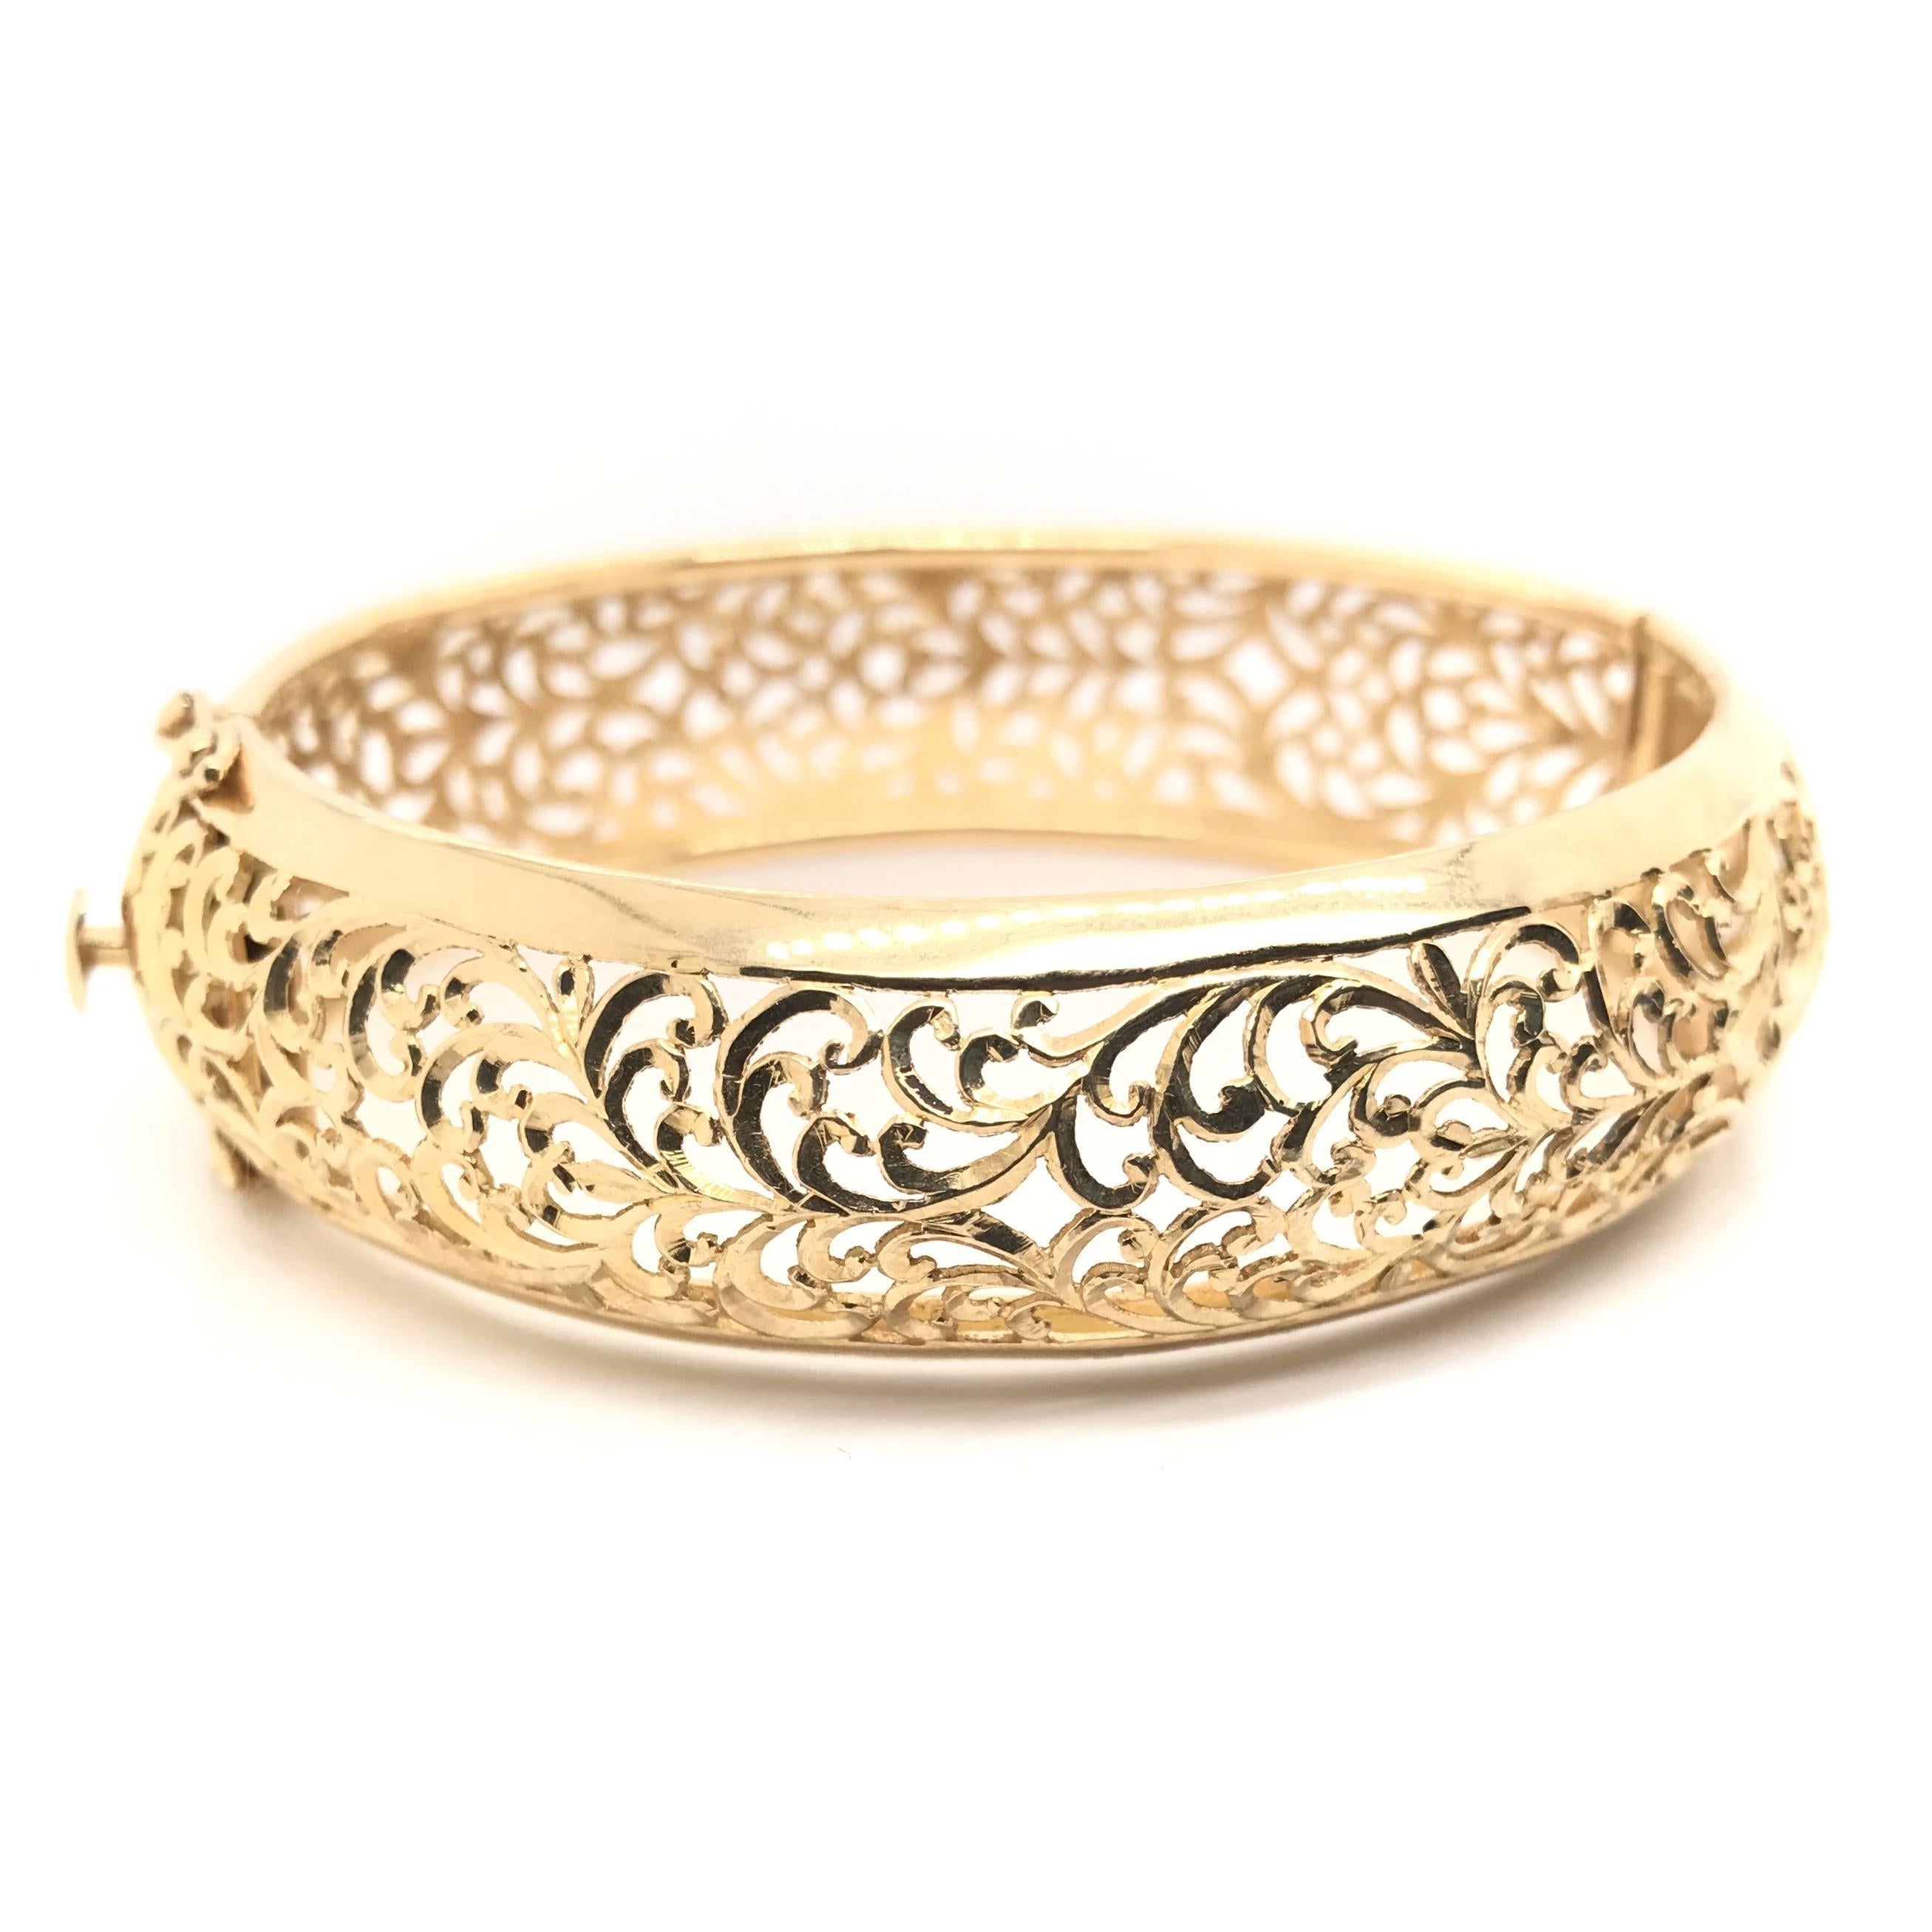 This enchanting contemporary estate piece features jaw dropping antique inspired filigree encompassing the entire length of the bangle. The filigree is arranged in a rich flourishing motif, so intricate and beguiling it is an instant signature